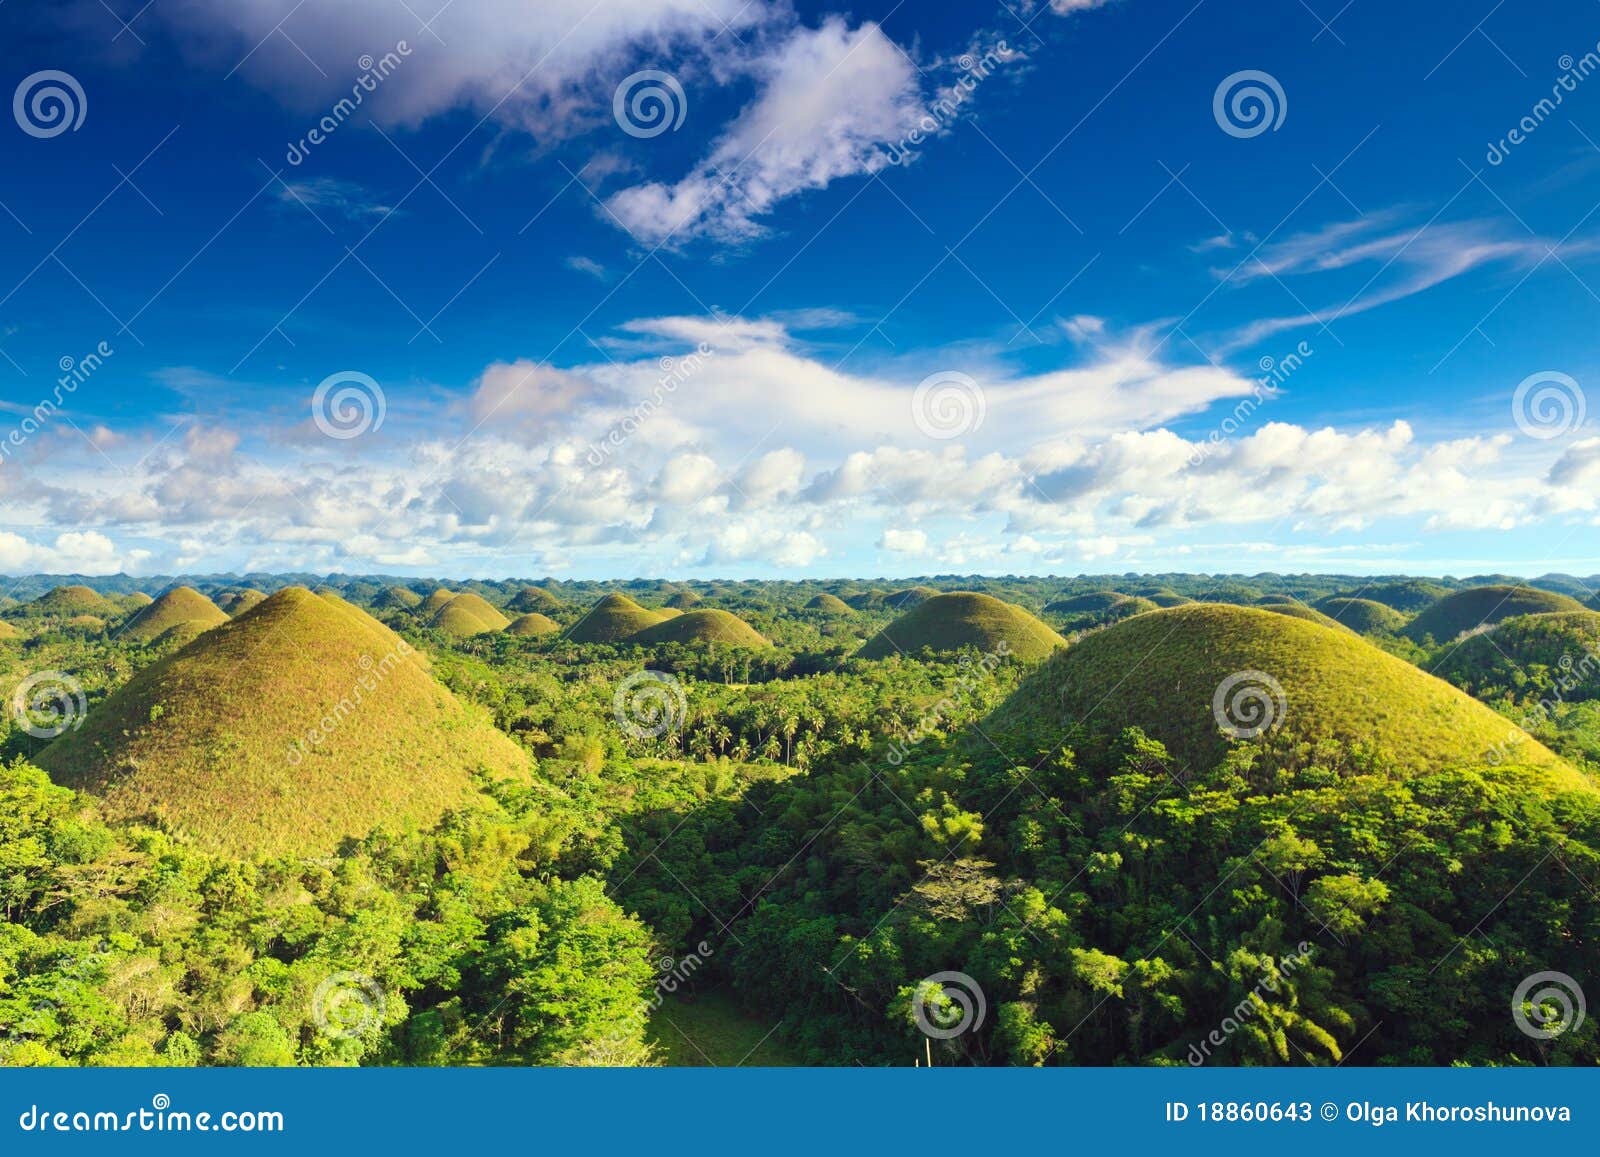 1 142 Chocolate Hills Photos Free Royalty Free Stock Photos From Dreamstime